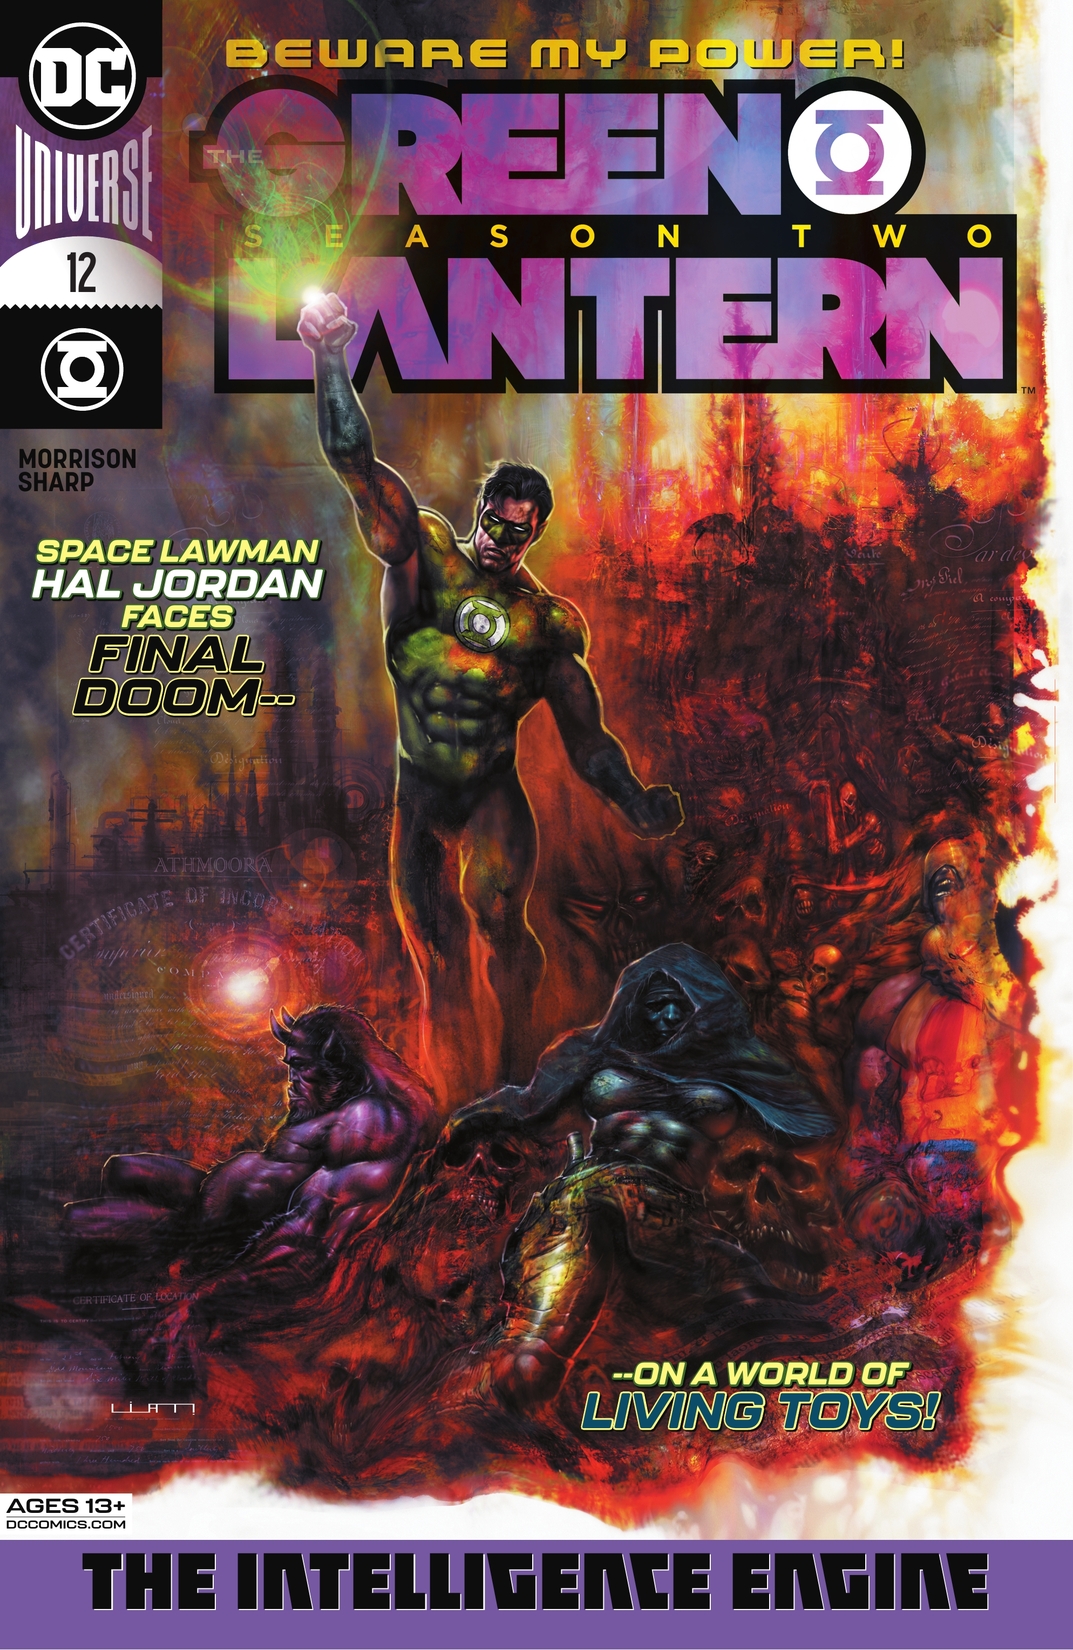 The Green Lantern Season Two #12 preview images